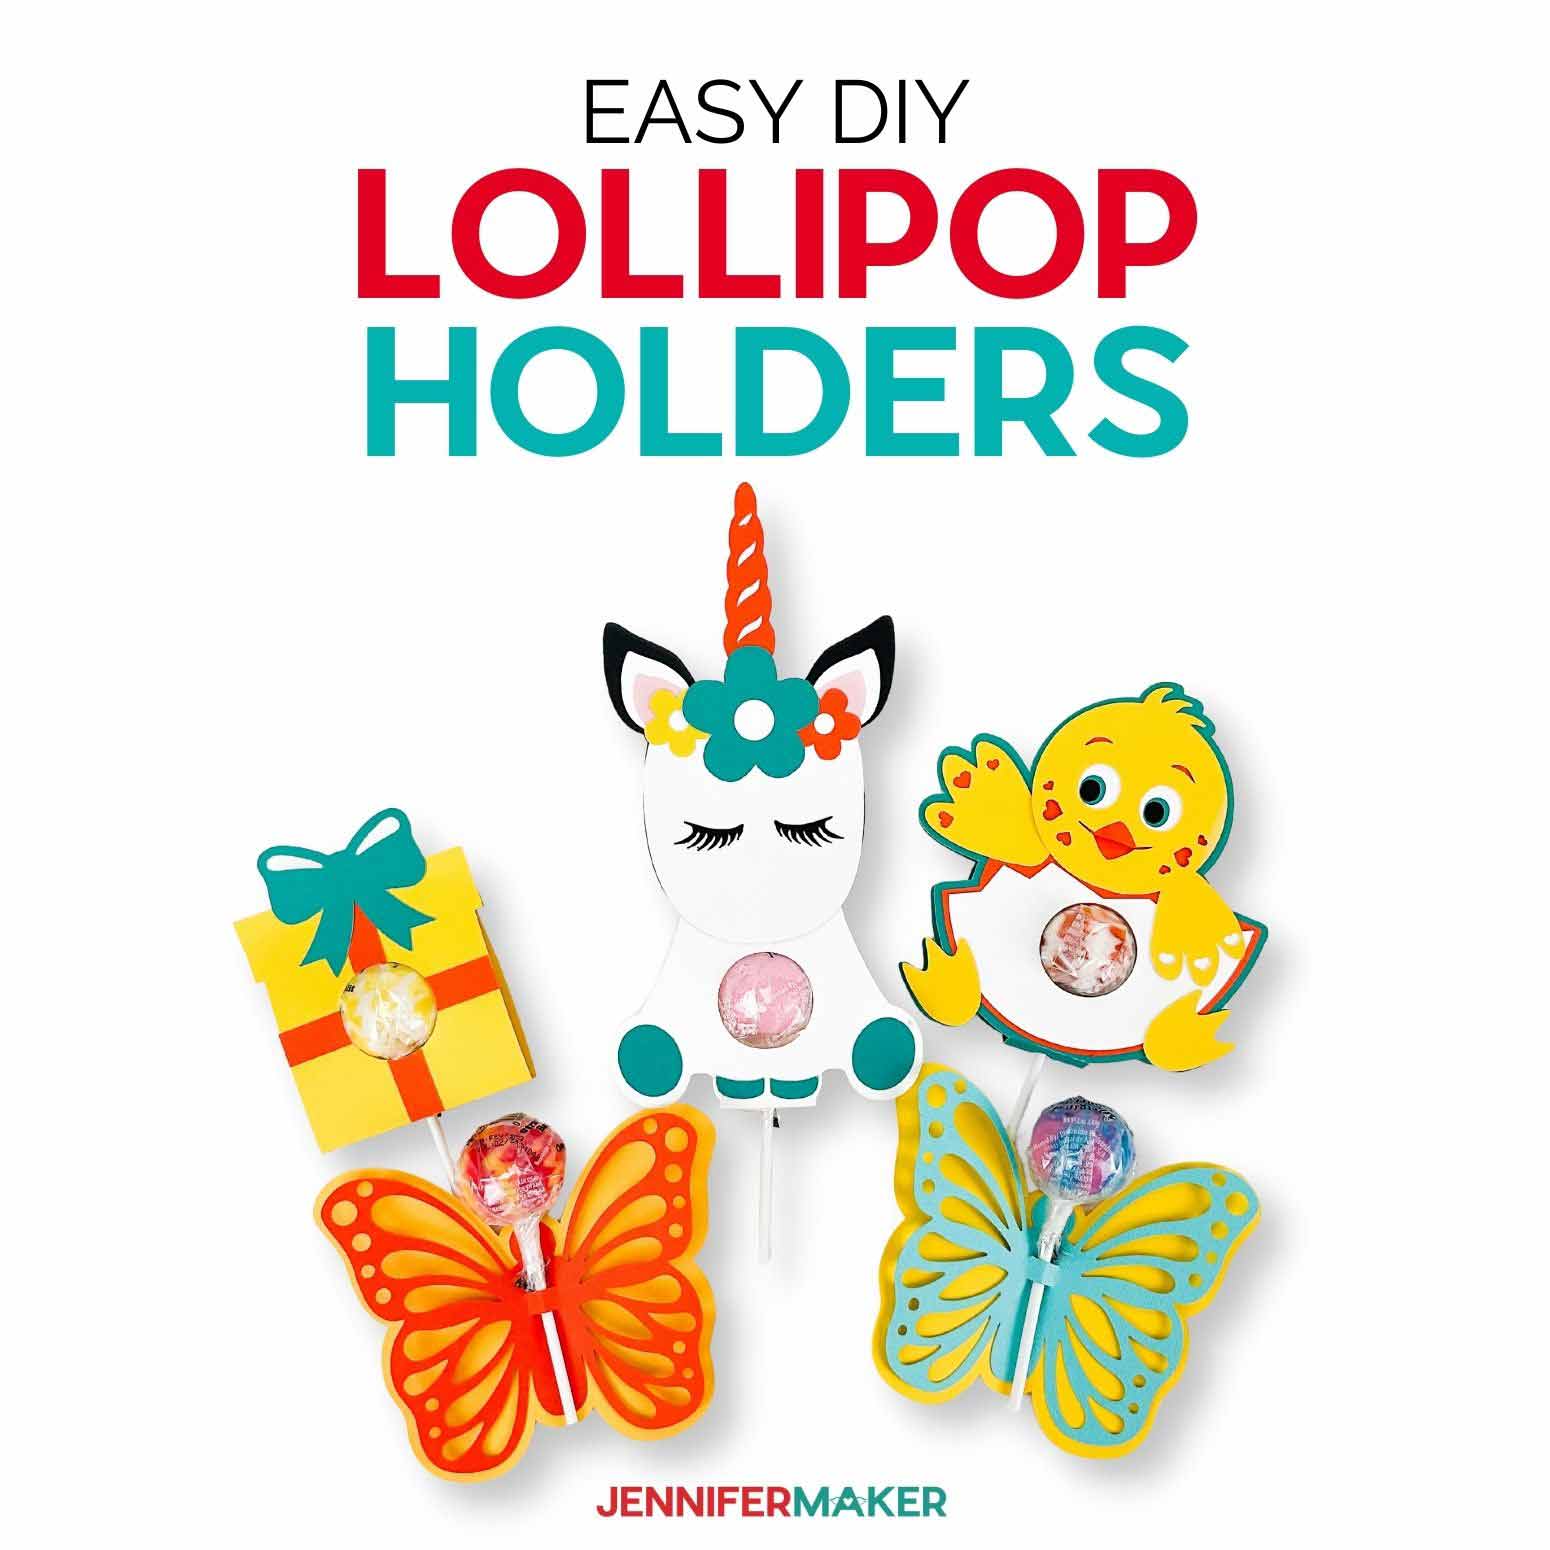 DIY Lollipop Holders for Holidays & Gifts: Unicorn, Chick, Butterfly, Present